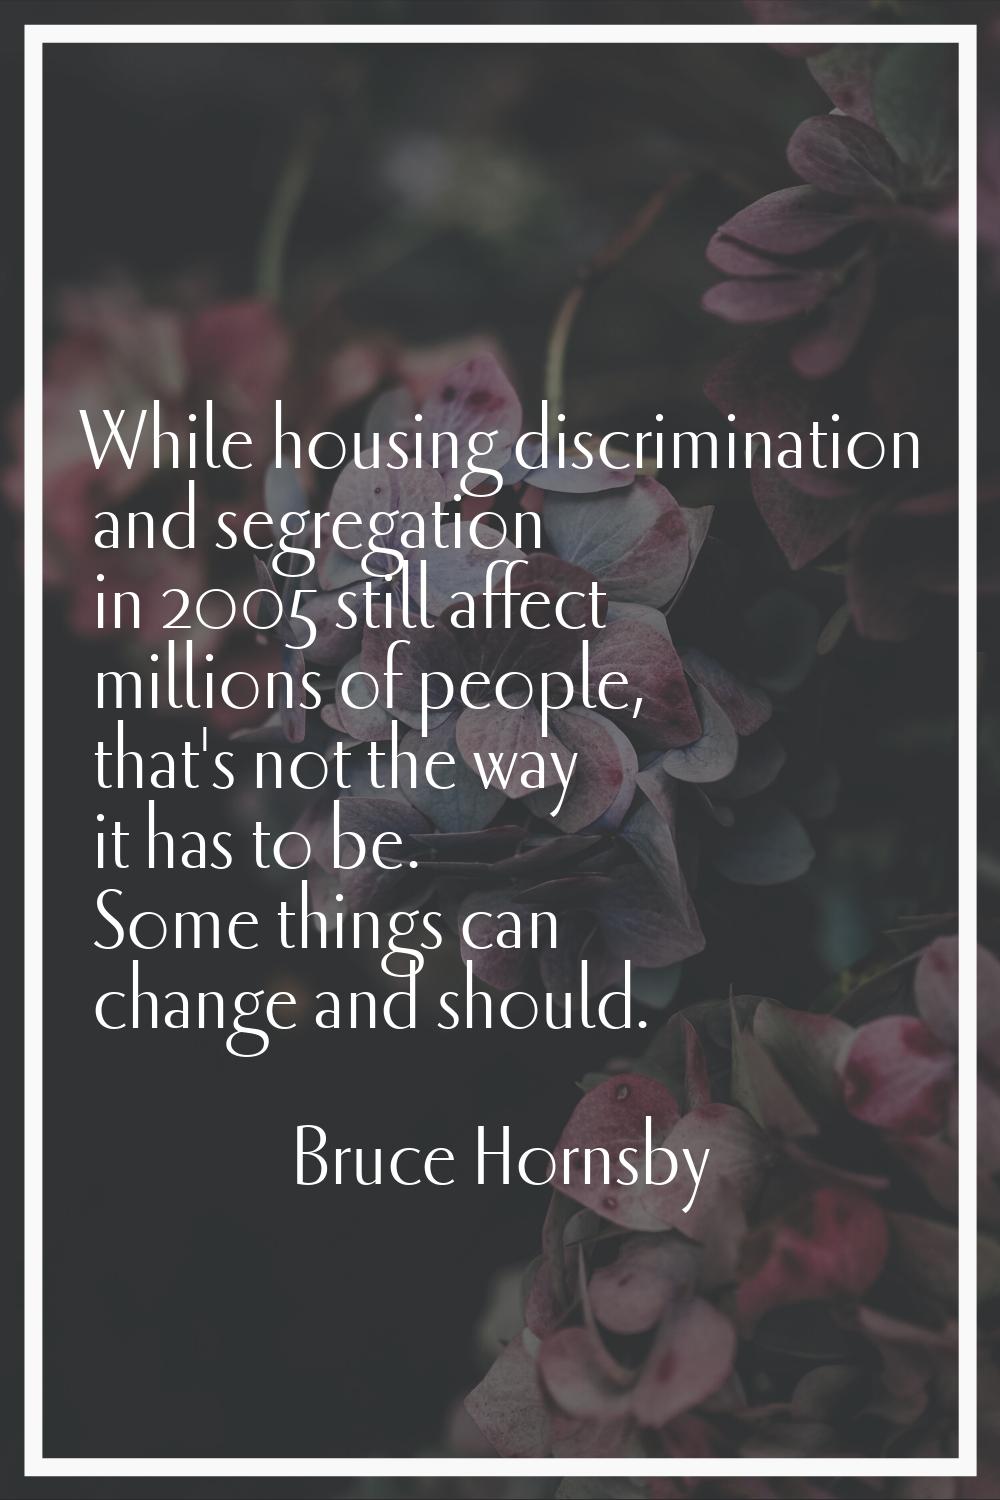 While housing discrimination and segregation in 2005 still affect millions of people, that's not th